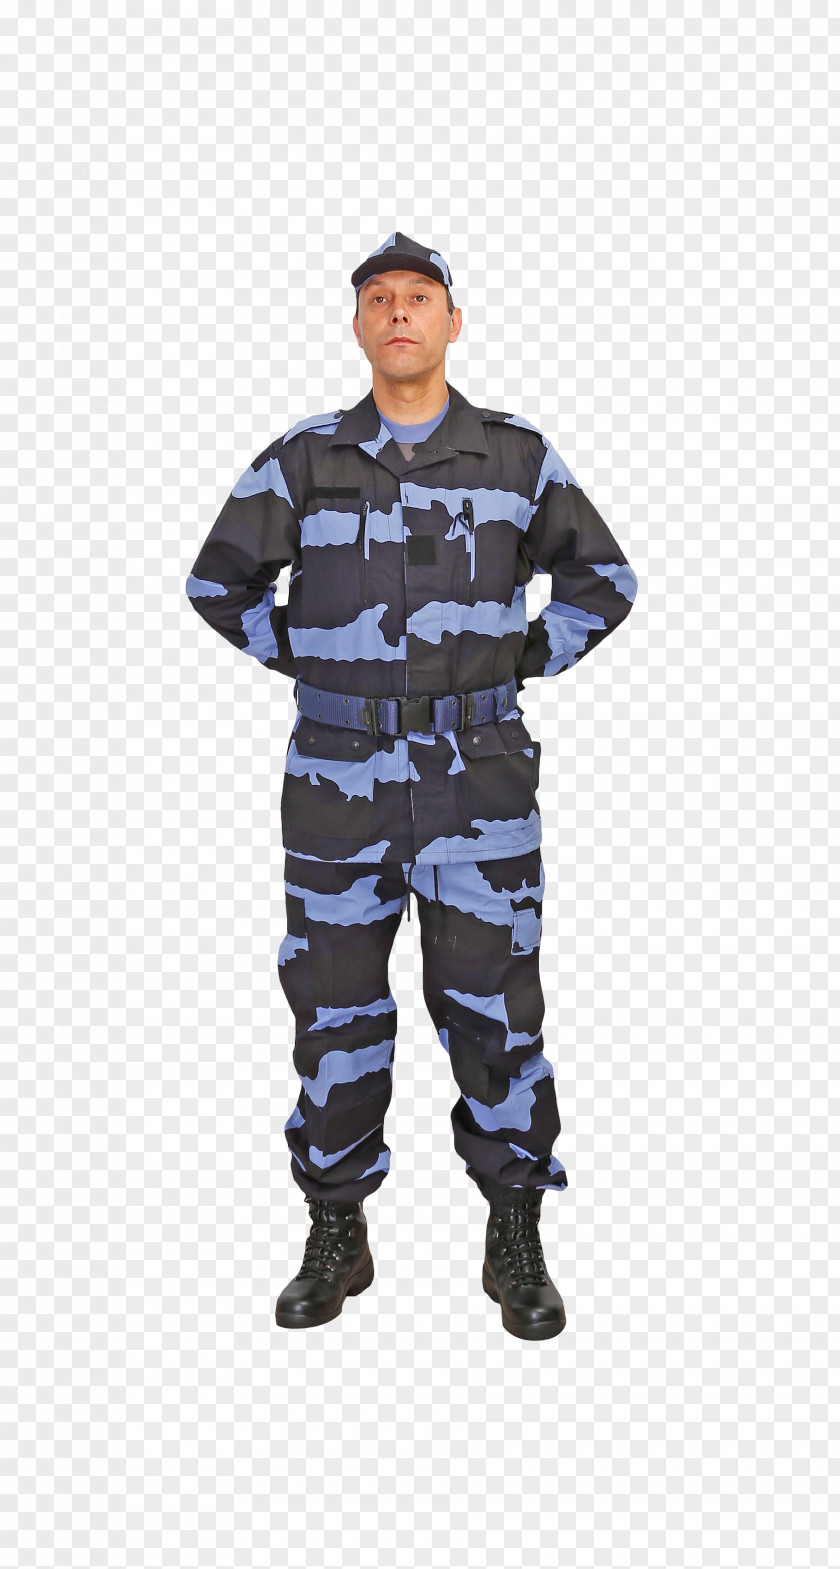 Soldier Military Camouflage Uniform Army PNG